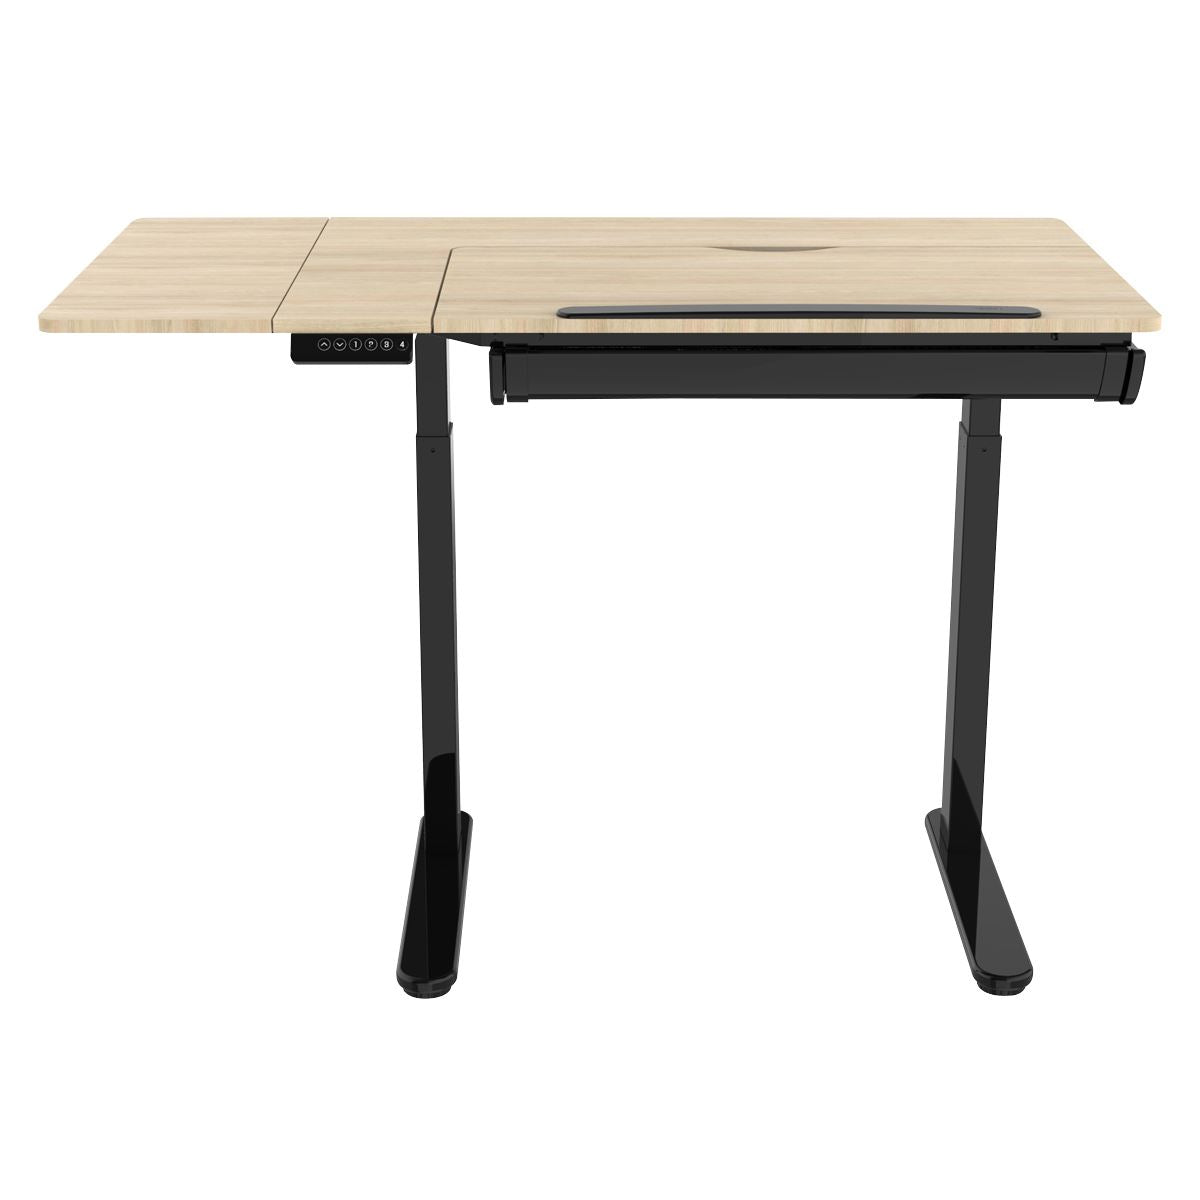 Dellonda Electric Standing Drafting Desk Ergonomic Drawing Sit/Stand Table 0-40°